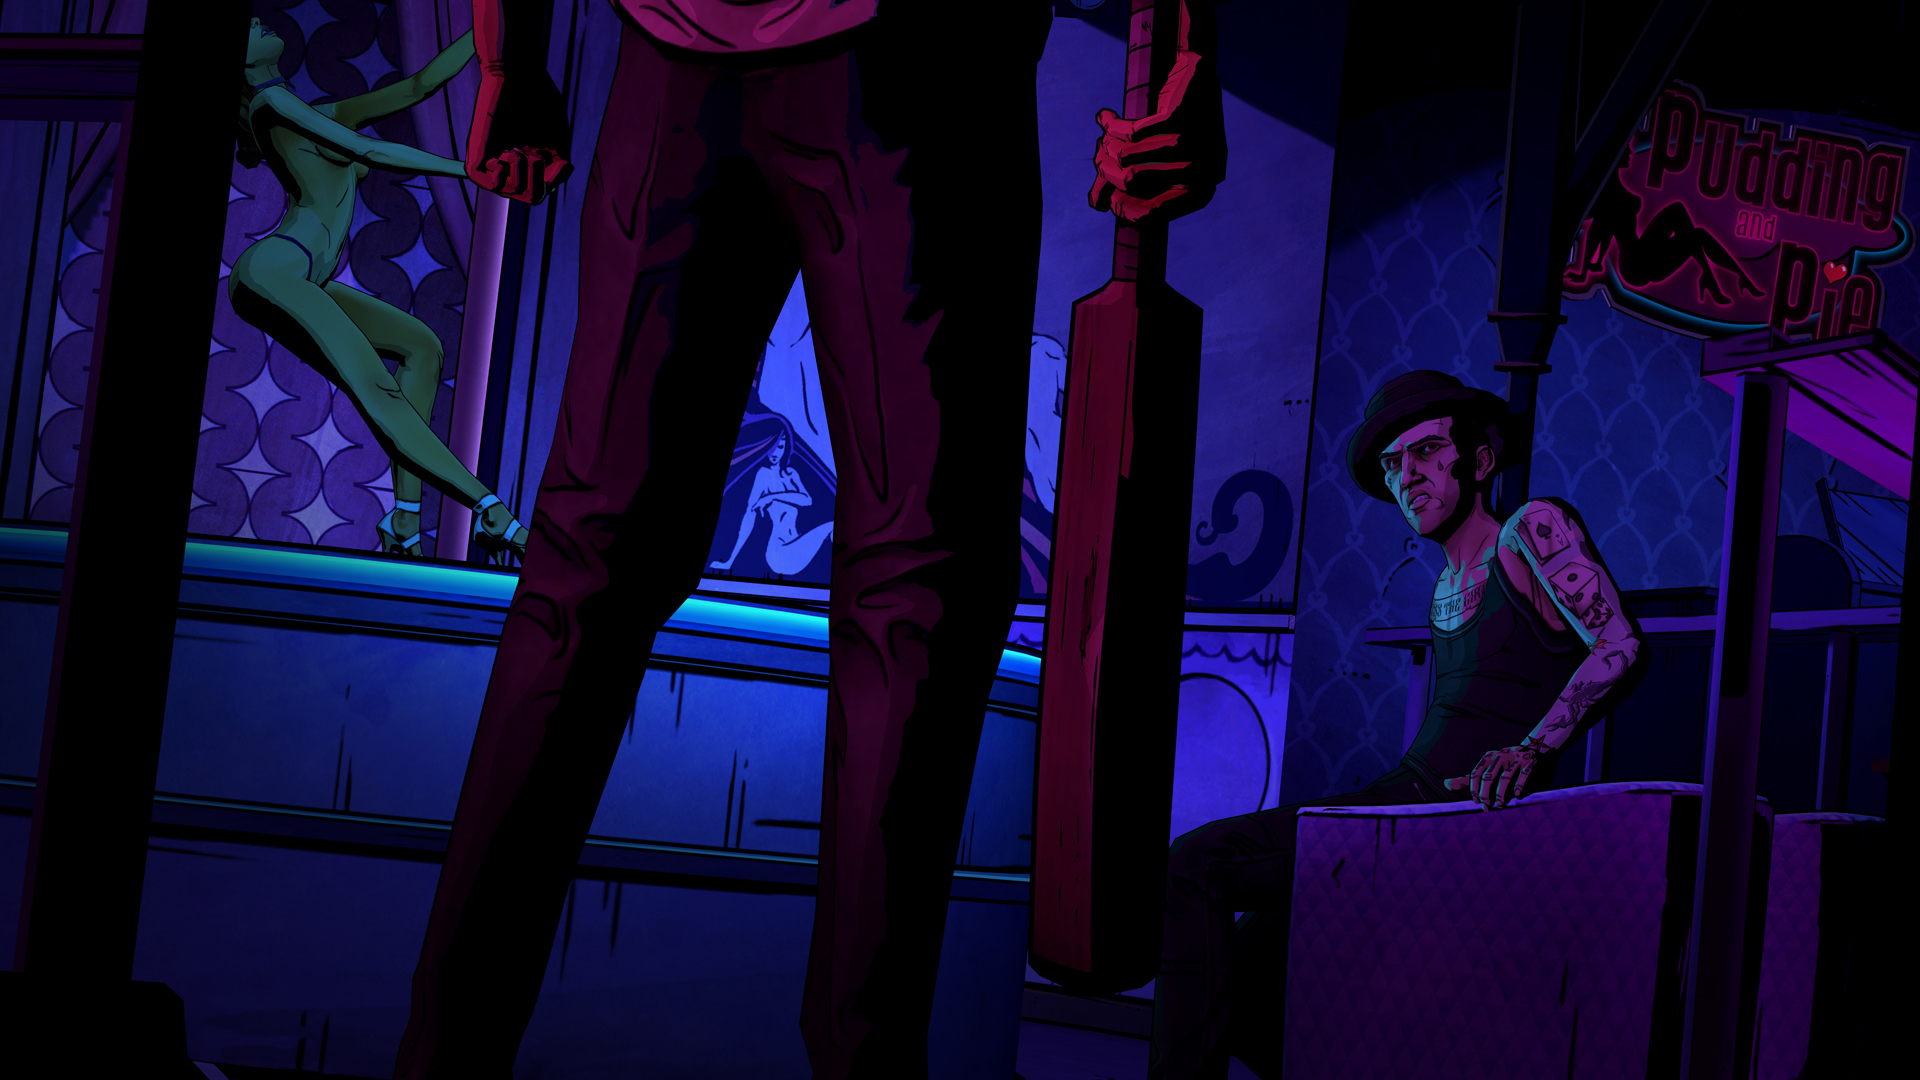 The Wolf Among Us Images 